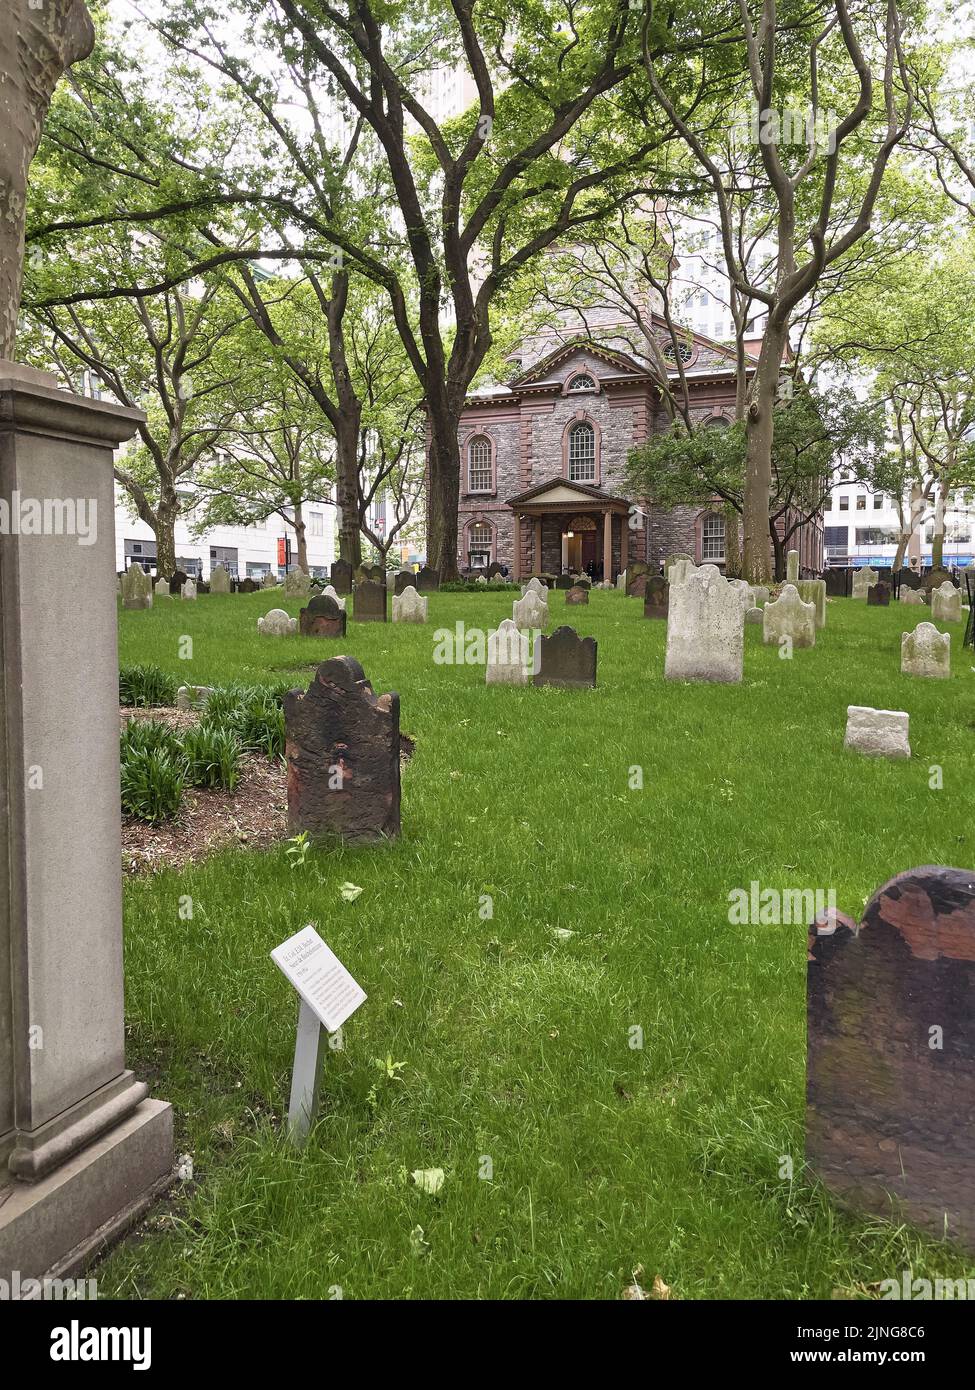 St. Paul's Chapel, Manhattan, New York City, USA.  Rear view of Chapel, showing cemetery with old headstones Stock Photo